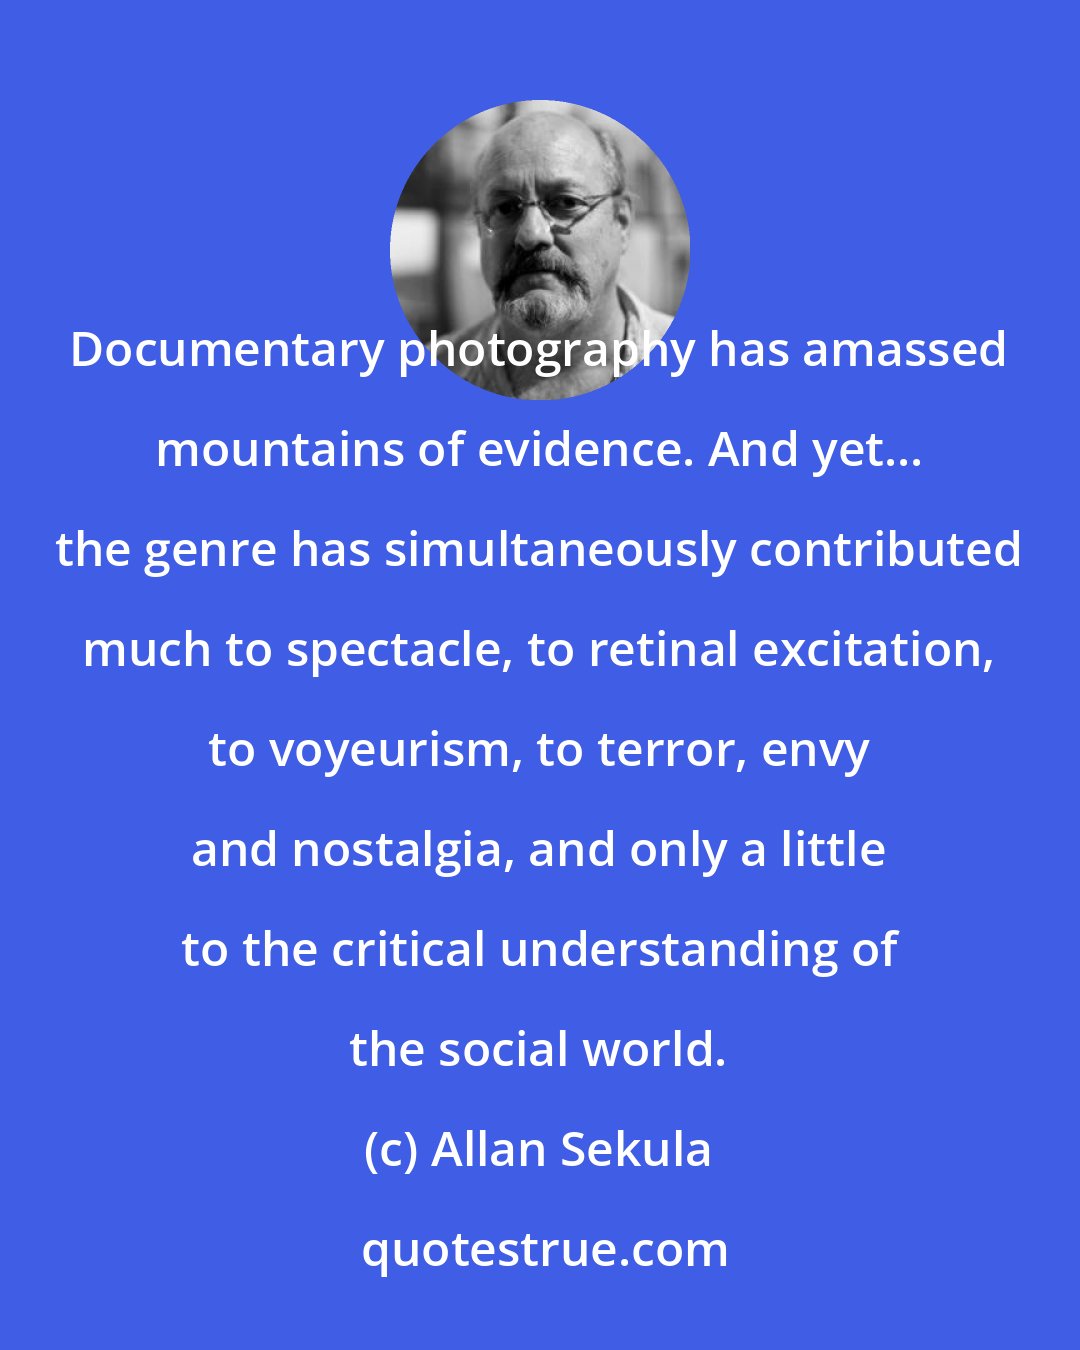 Allan Sekula: Documentary photography has amassed mountains of evidence. And yet... the genre has simultaneously contributed much to spectacle, to retinal excitation, to voyeurism, to terror, envy and nostalgia, and only a little to the critical understanding of the social world.